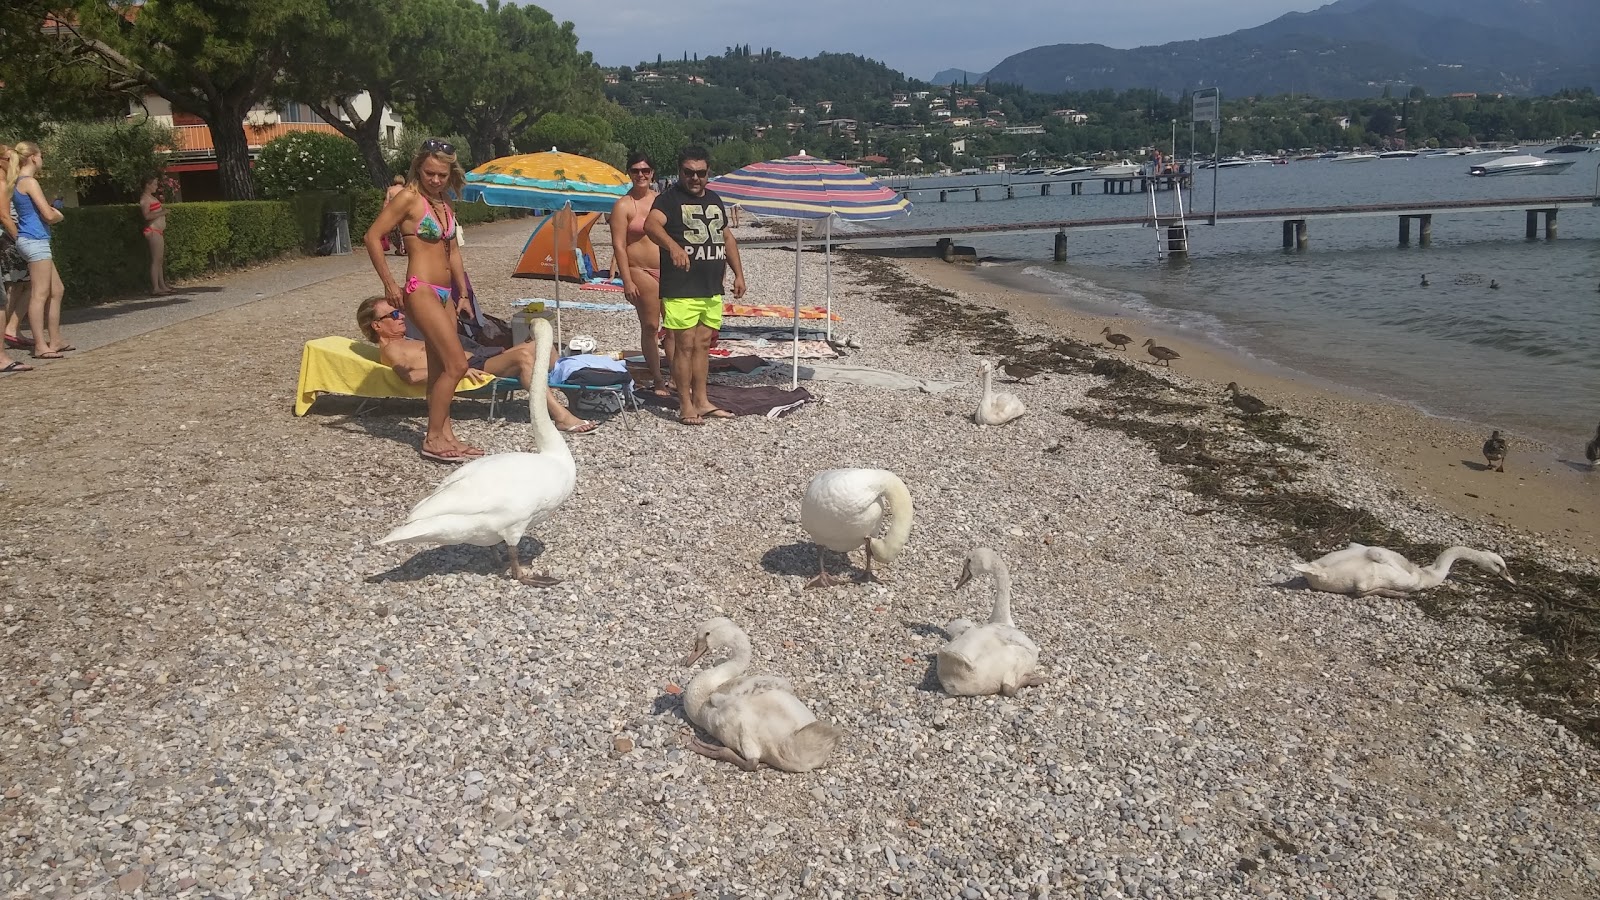 Photo of Pieve Vecchia Beach - popular place among relax connoisseurs